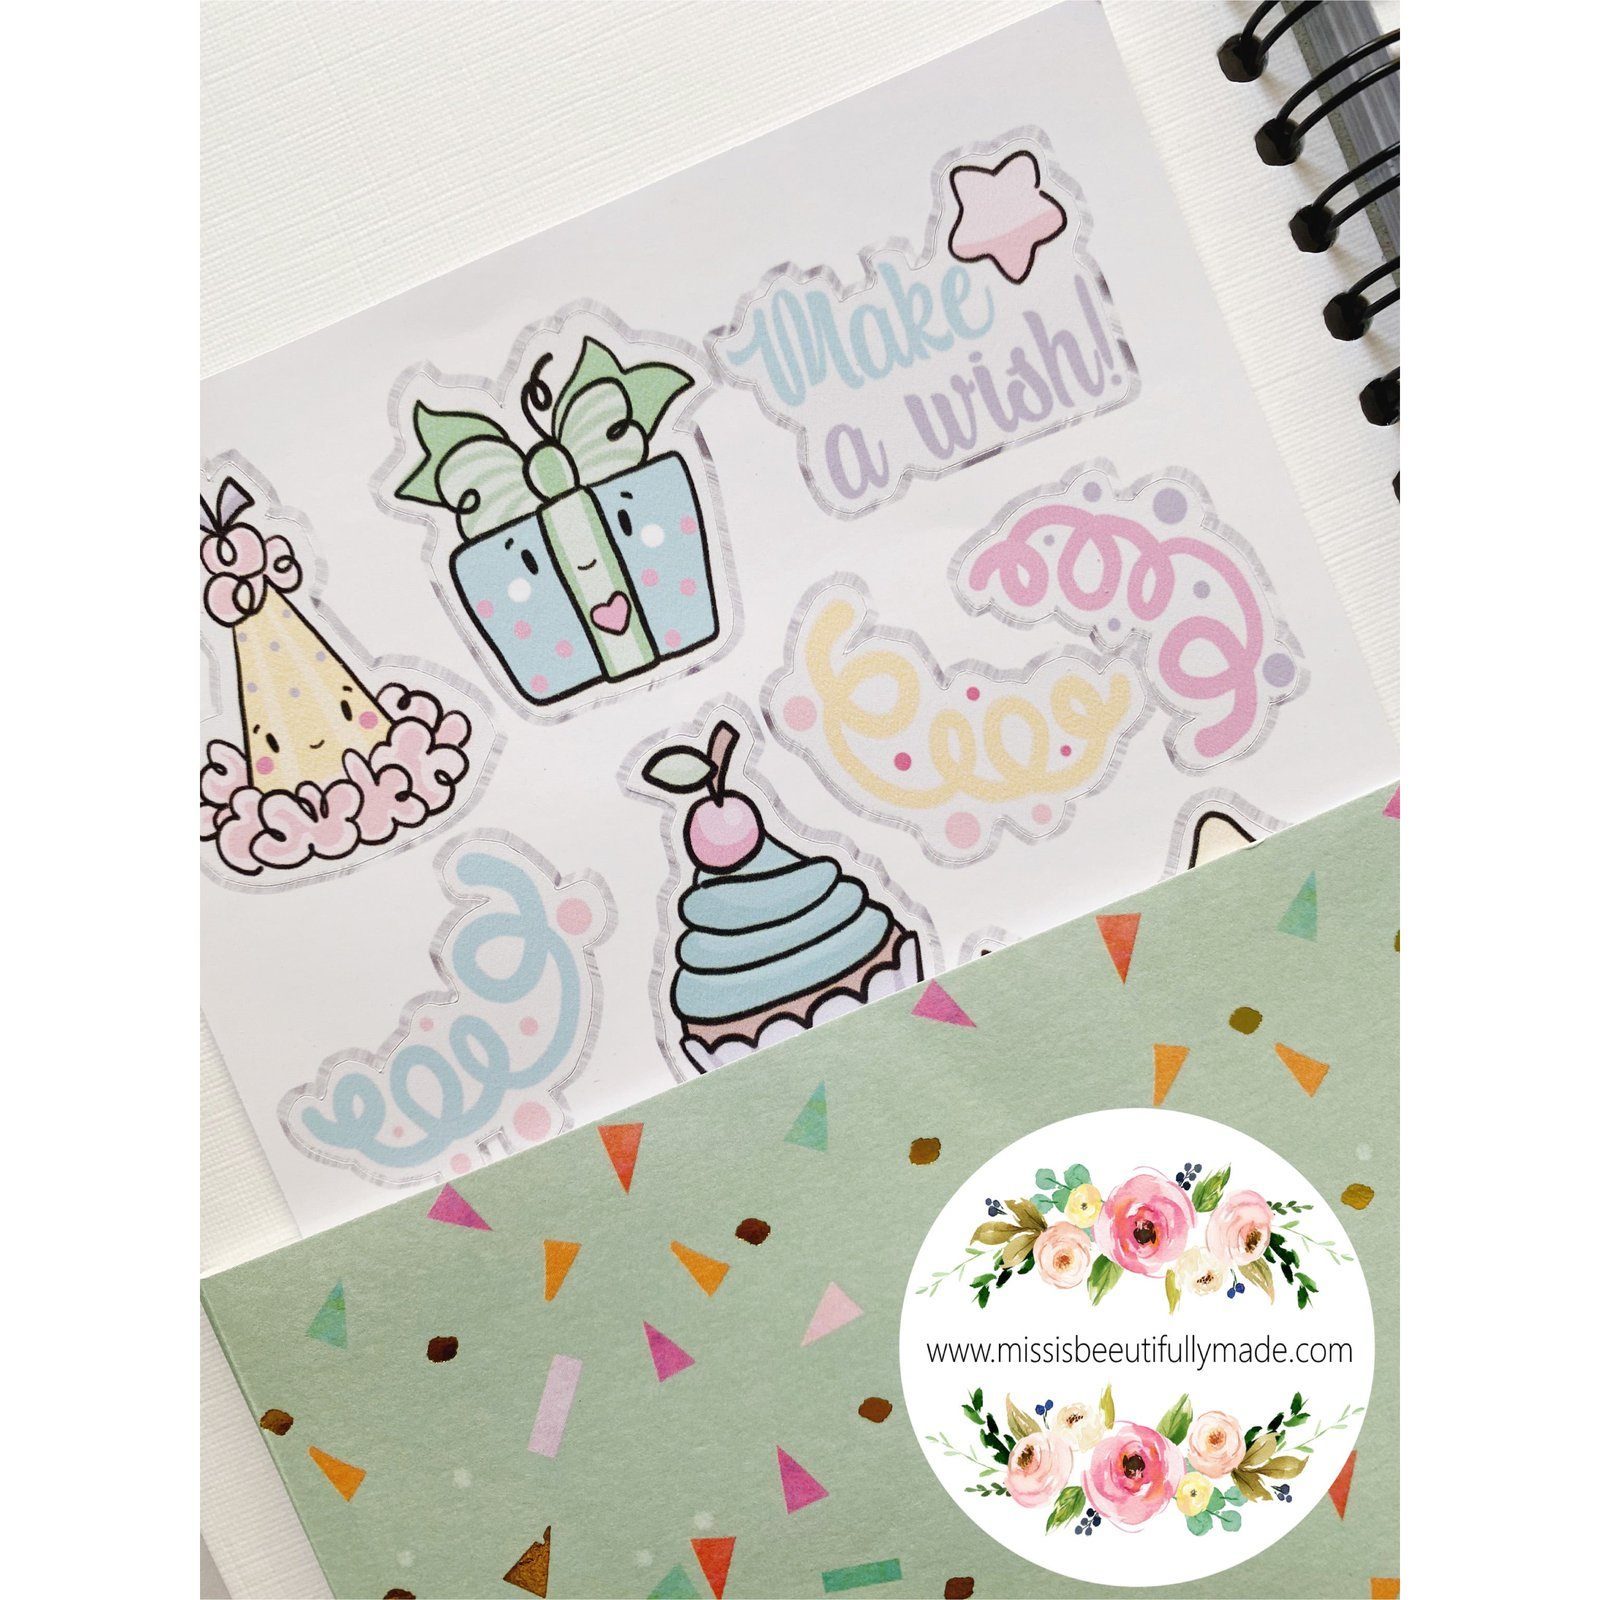 Handmade birthday planner book, high quality papers & embellishments. Cute kawaii design, light pastel rainbow colours and gold glitters. Contains pages for keeping track of upcoming birthdays, gift tracker pages, a folder for storing cards.